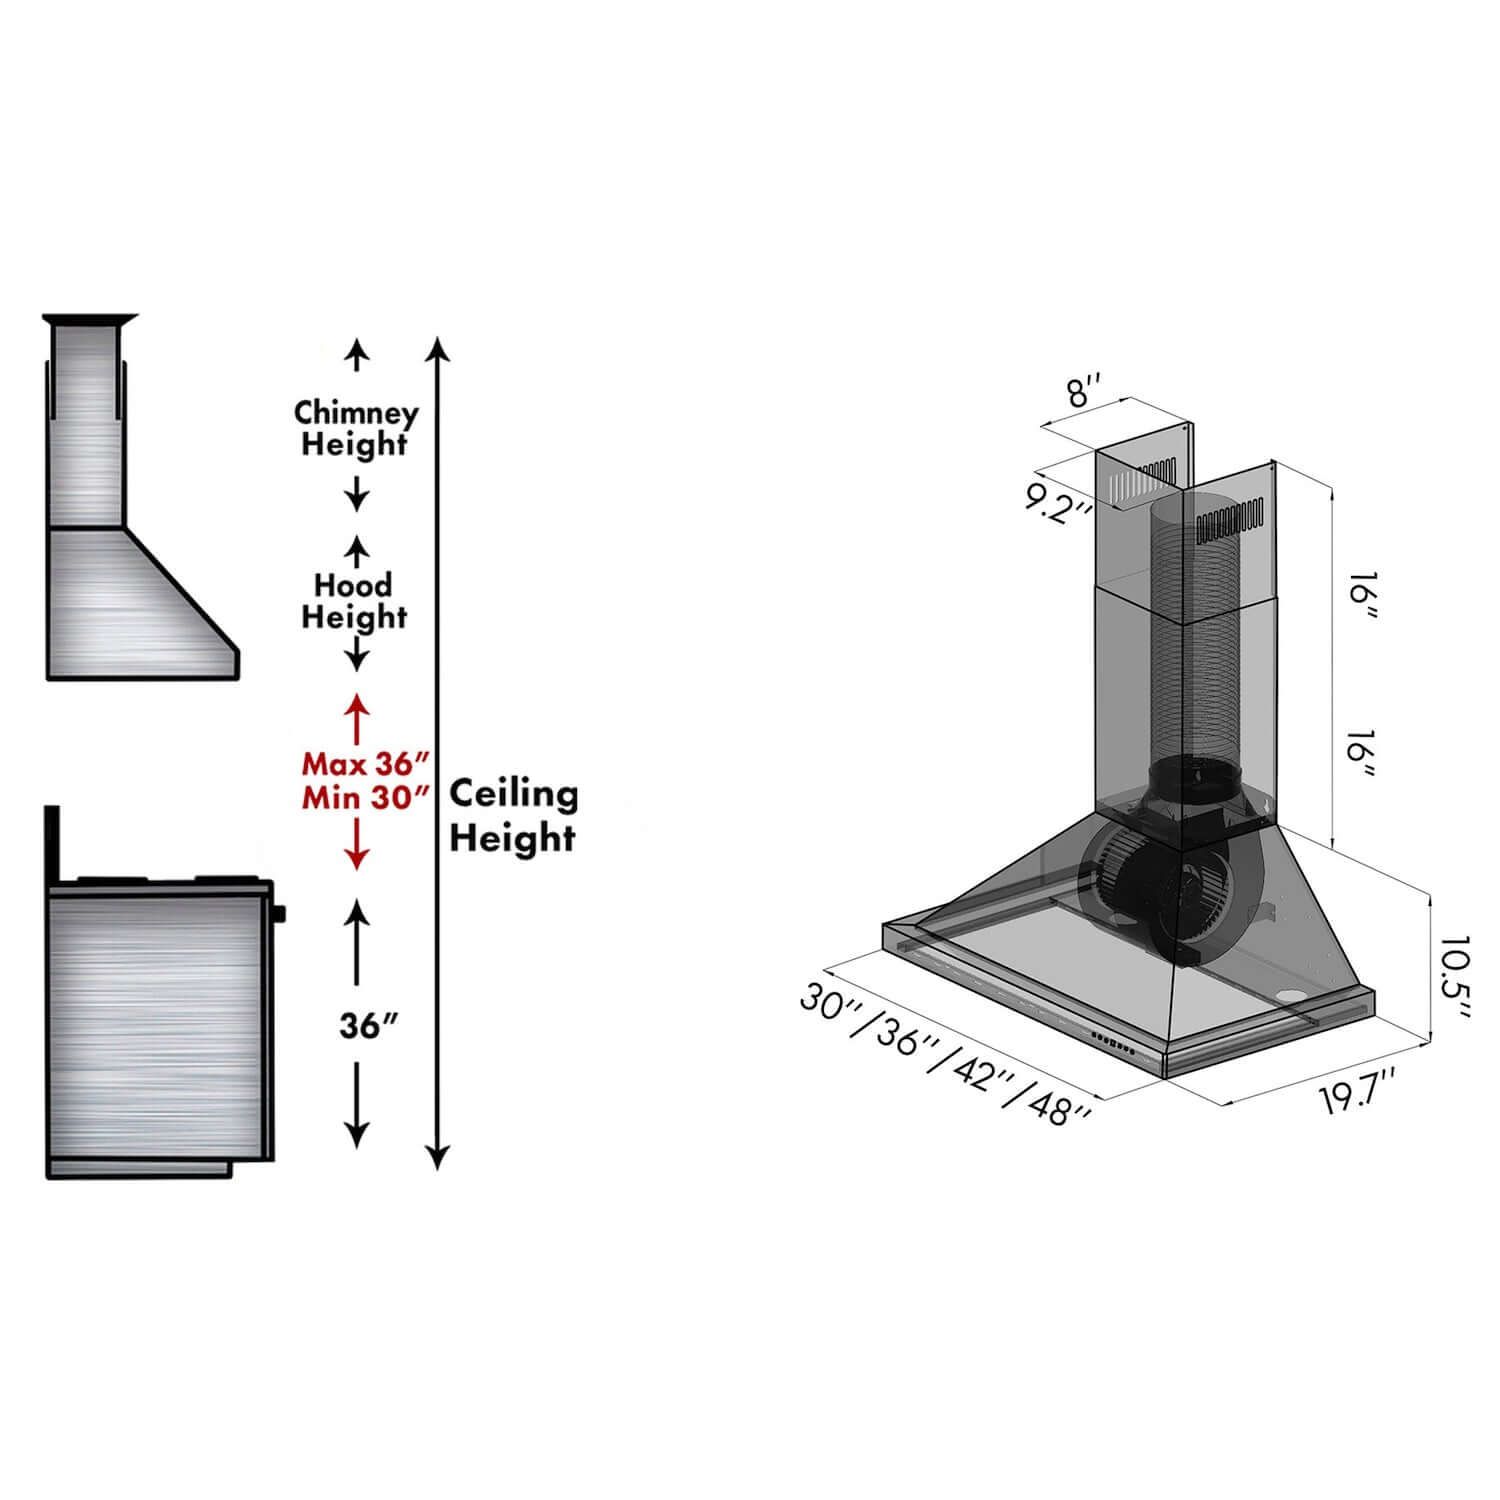 ZLINE Range Hood dimensions and Chimney Height Guide.